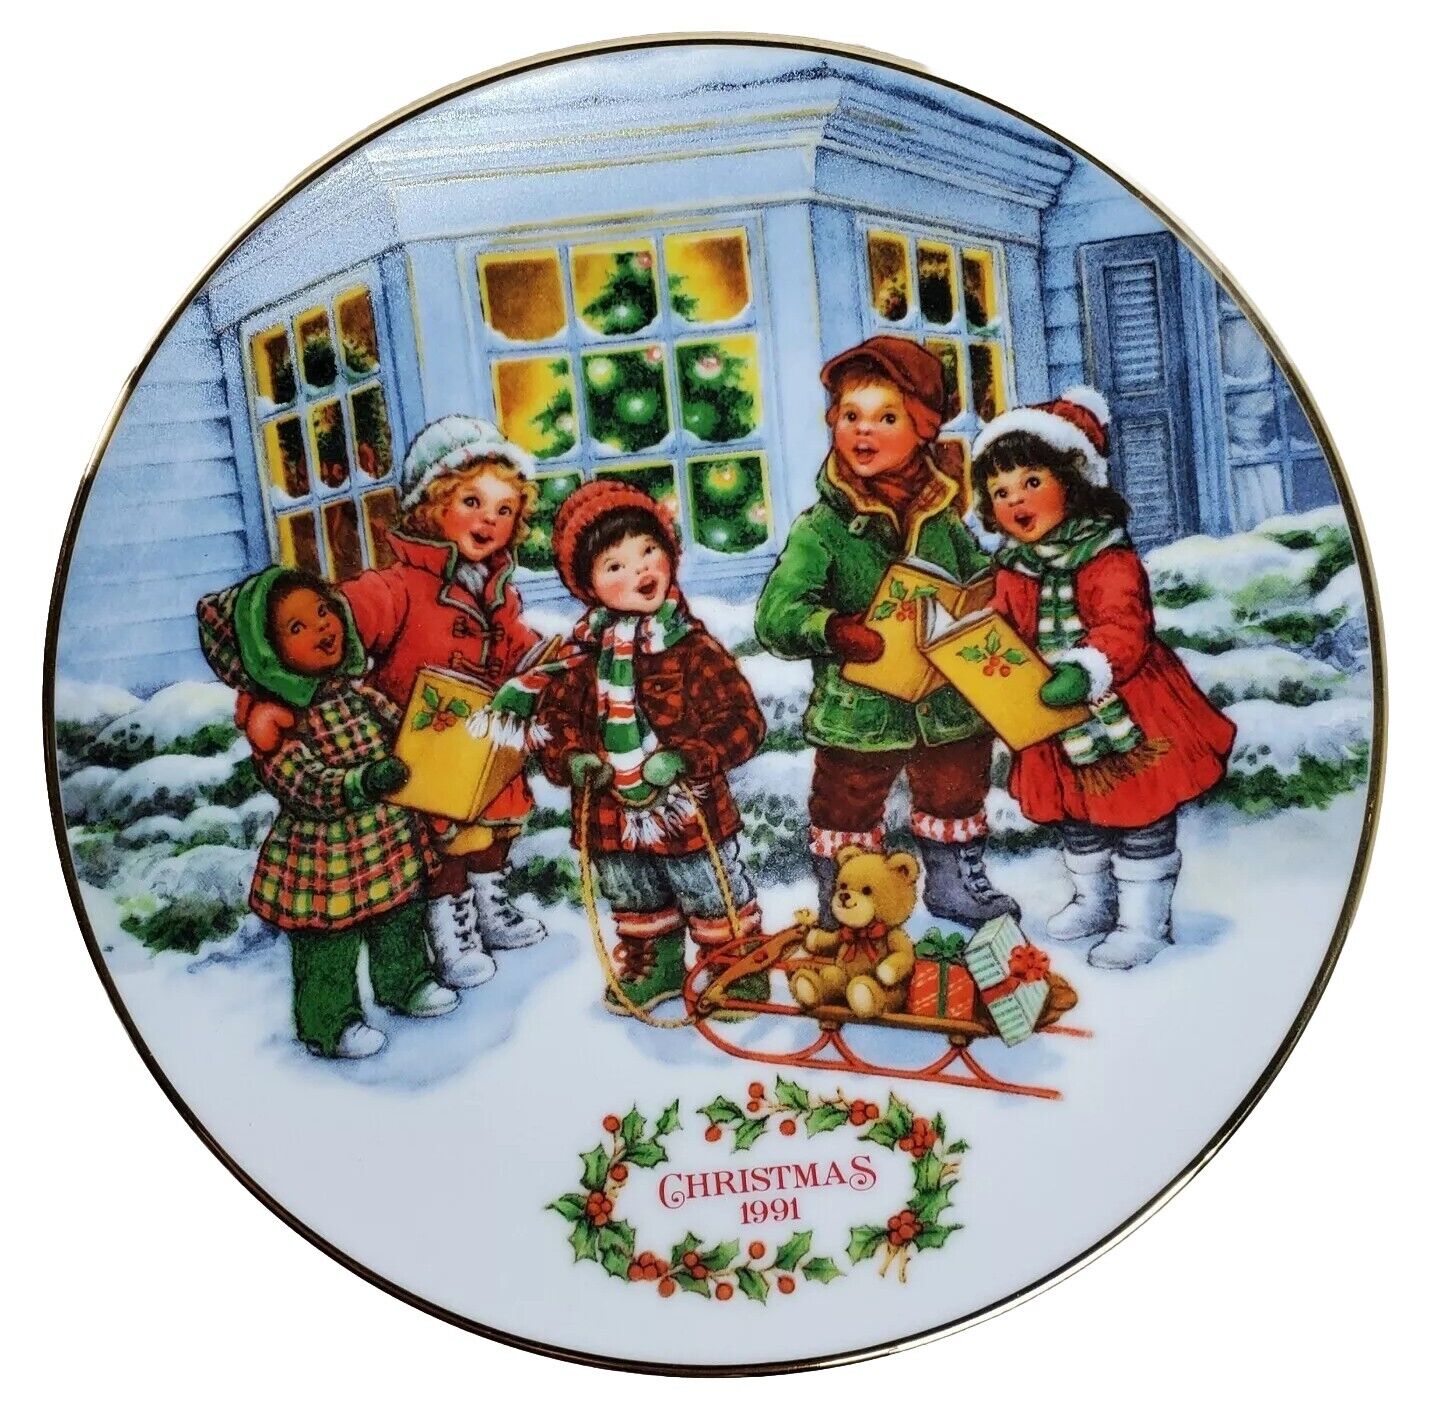 1991 AVON Perfect Harmony Christmas Collectible Porcelain PLATE 22K Gold Trim